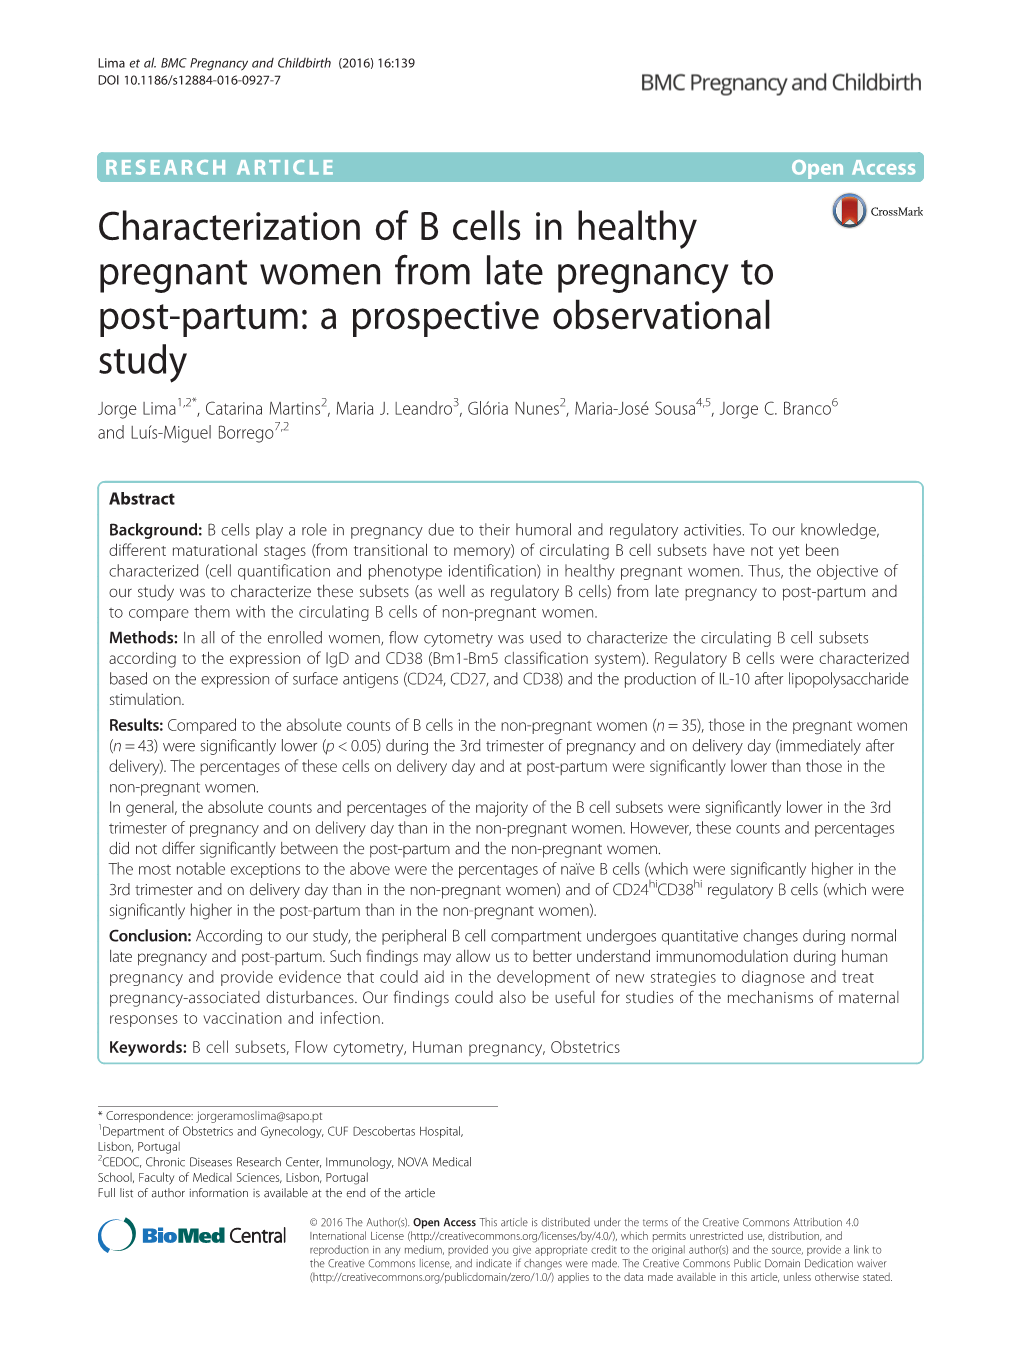 Characterization of B Cells in Healthy Pregnant Women from Late Pregnancy to Post-Partum: a Prospective Observational Study Jorge Lima1,2*, Catarina Martins2, Maria J